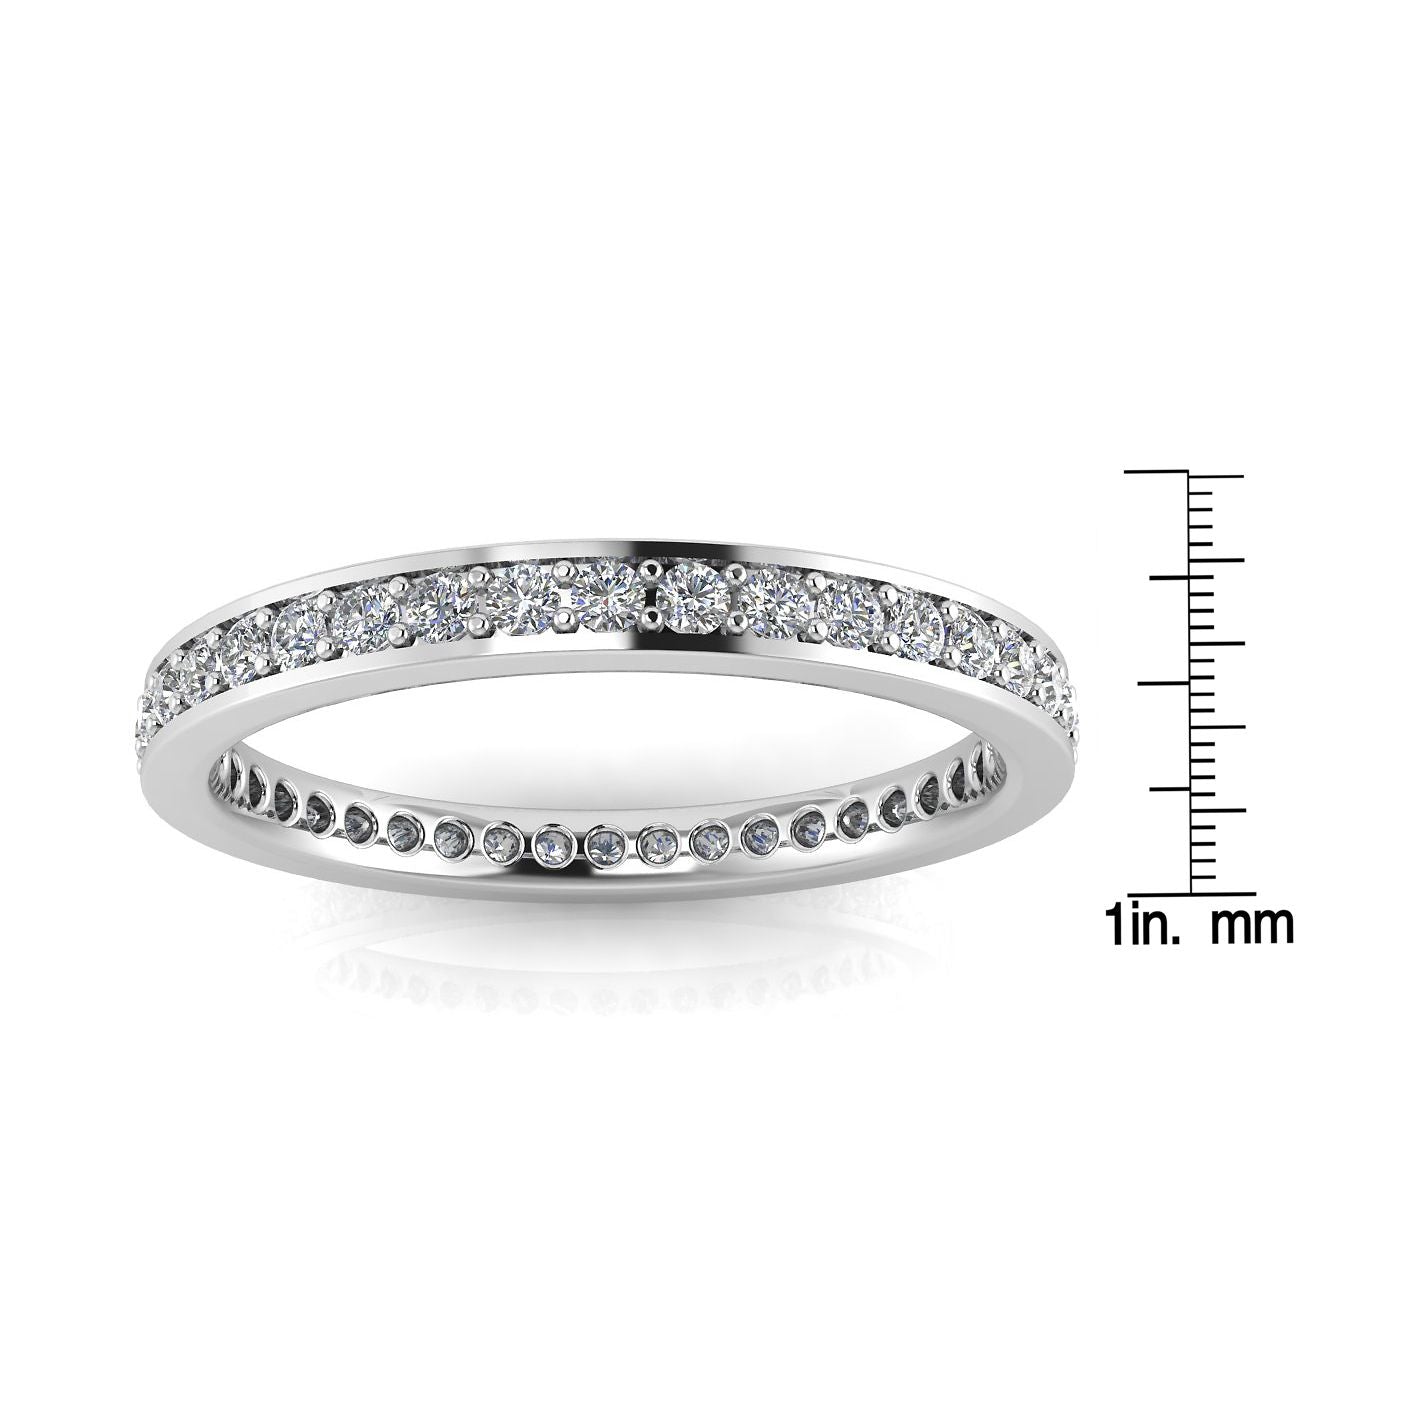 Round Brilliant Cut Diamond Channel Pave Set Eternity Ring In 14k White Gold  (0.66ct. Tw.) Ring Size 4.5